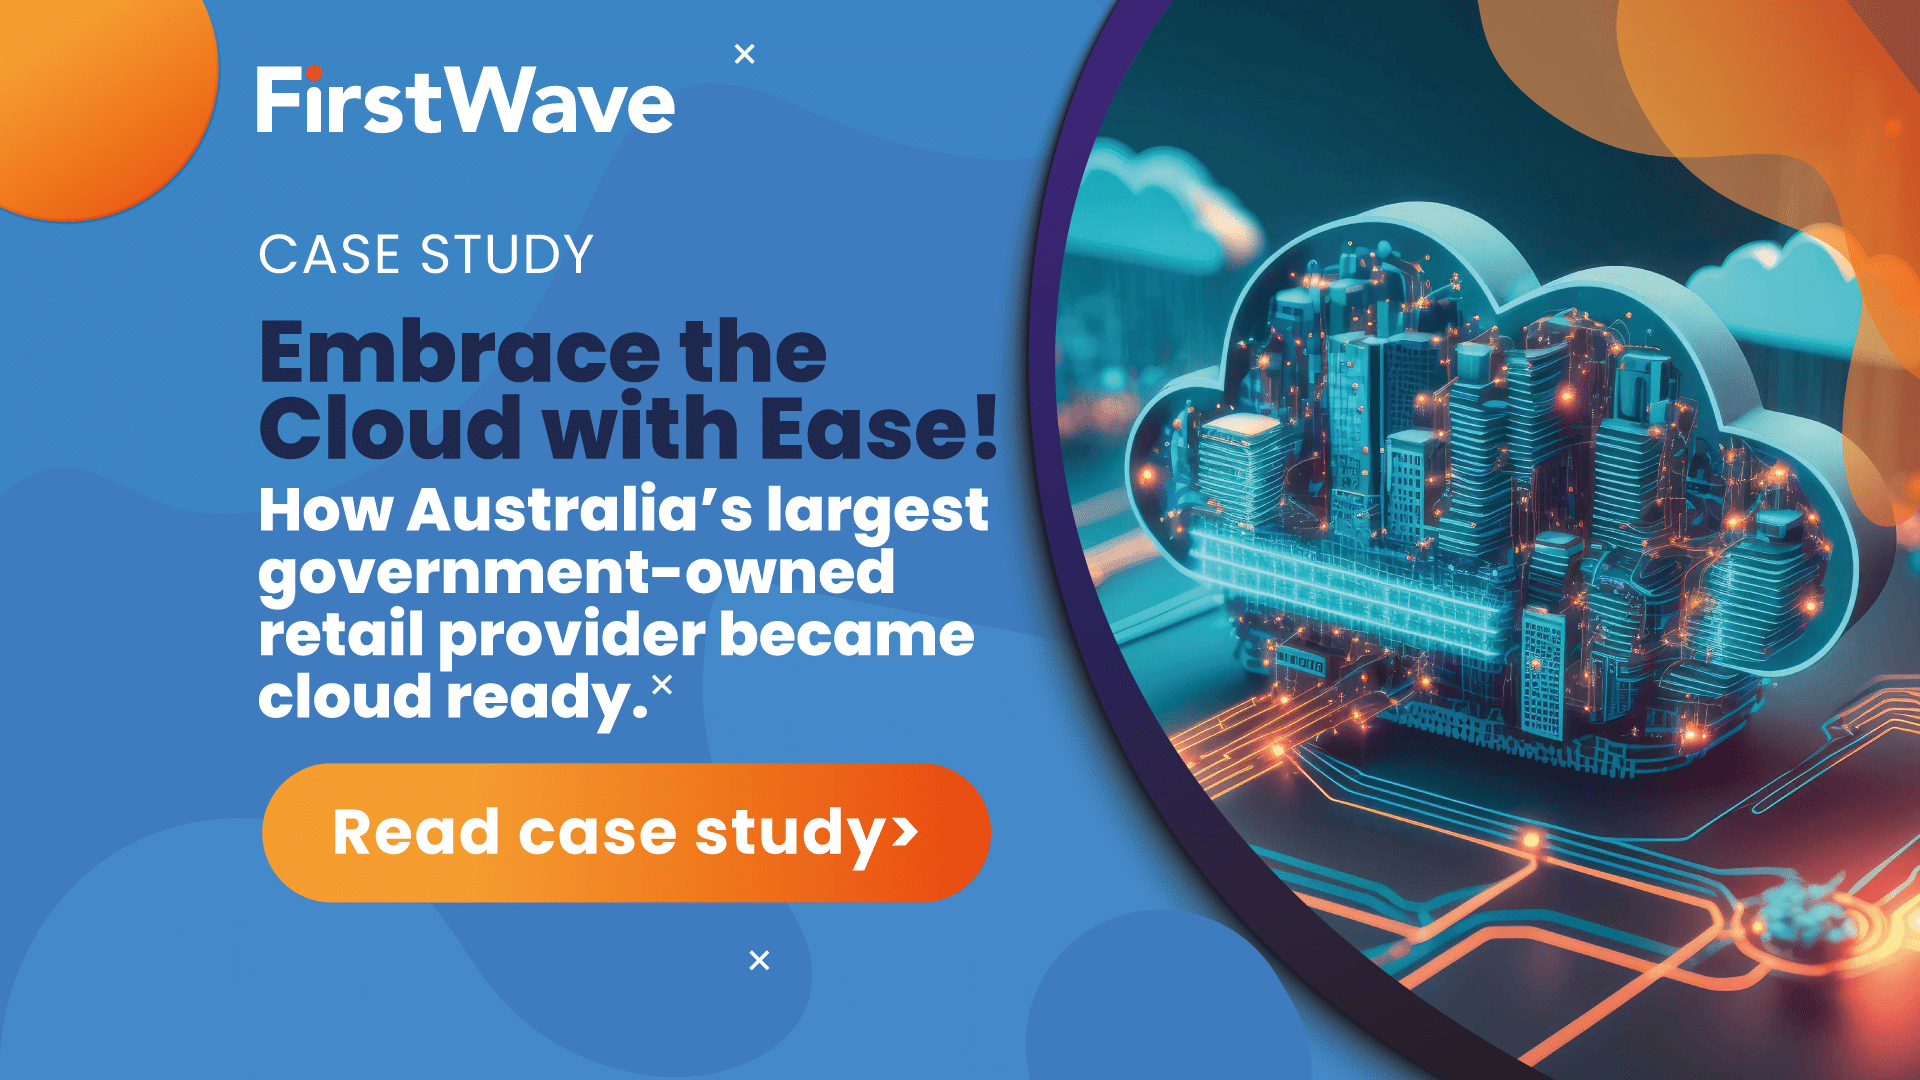 FirstWave Seamless migration of the entire email content to the cloud Australia’s postal service - Featured Image